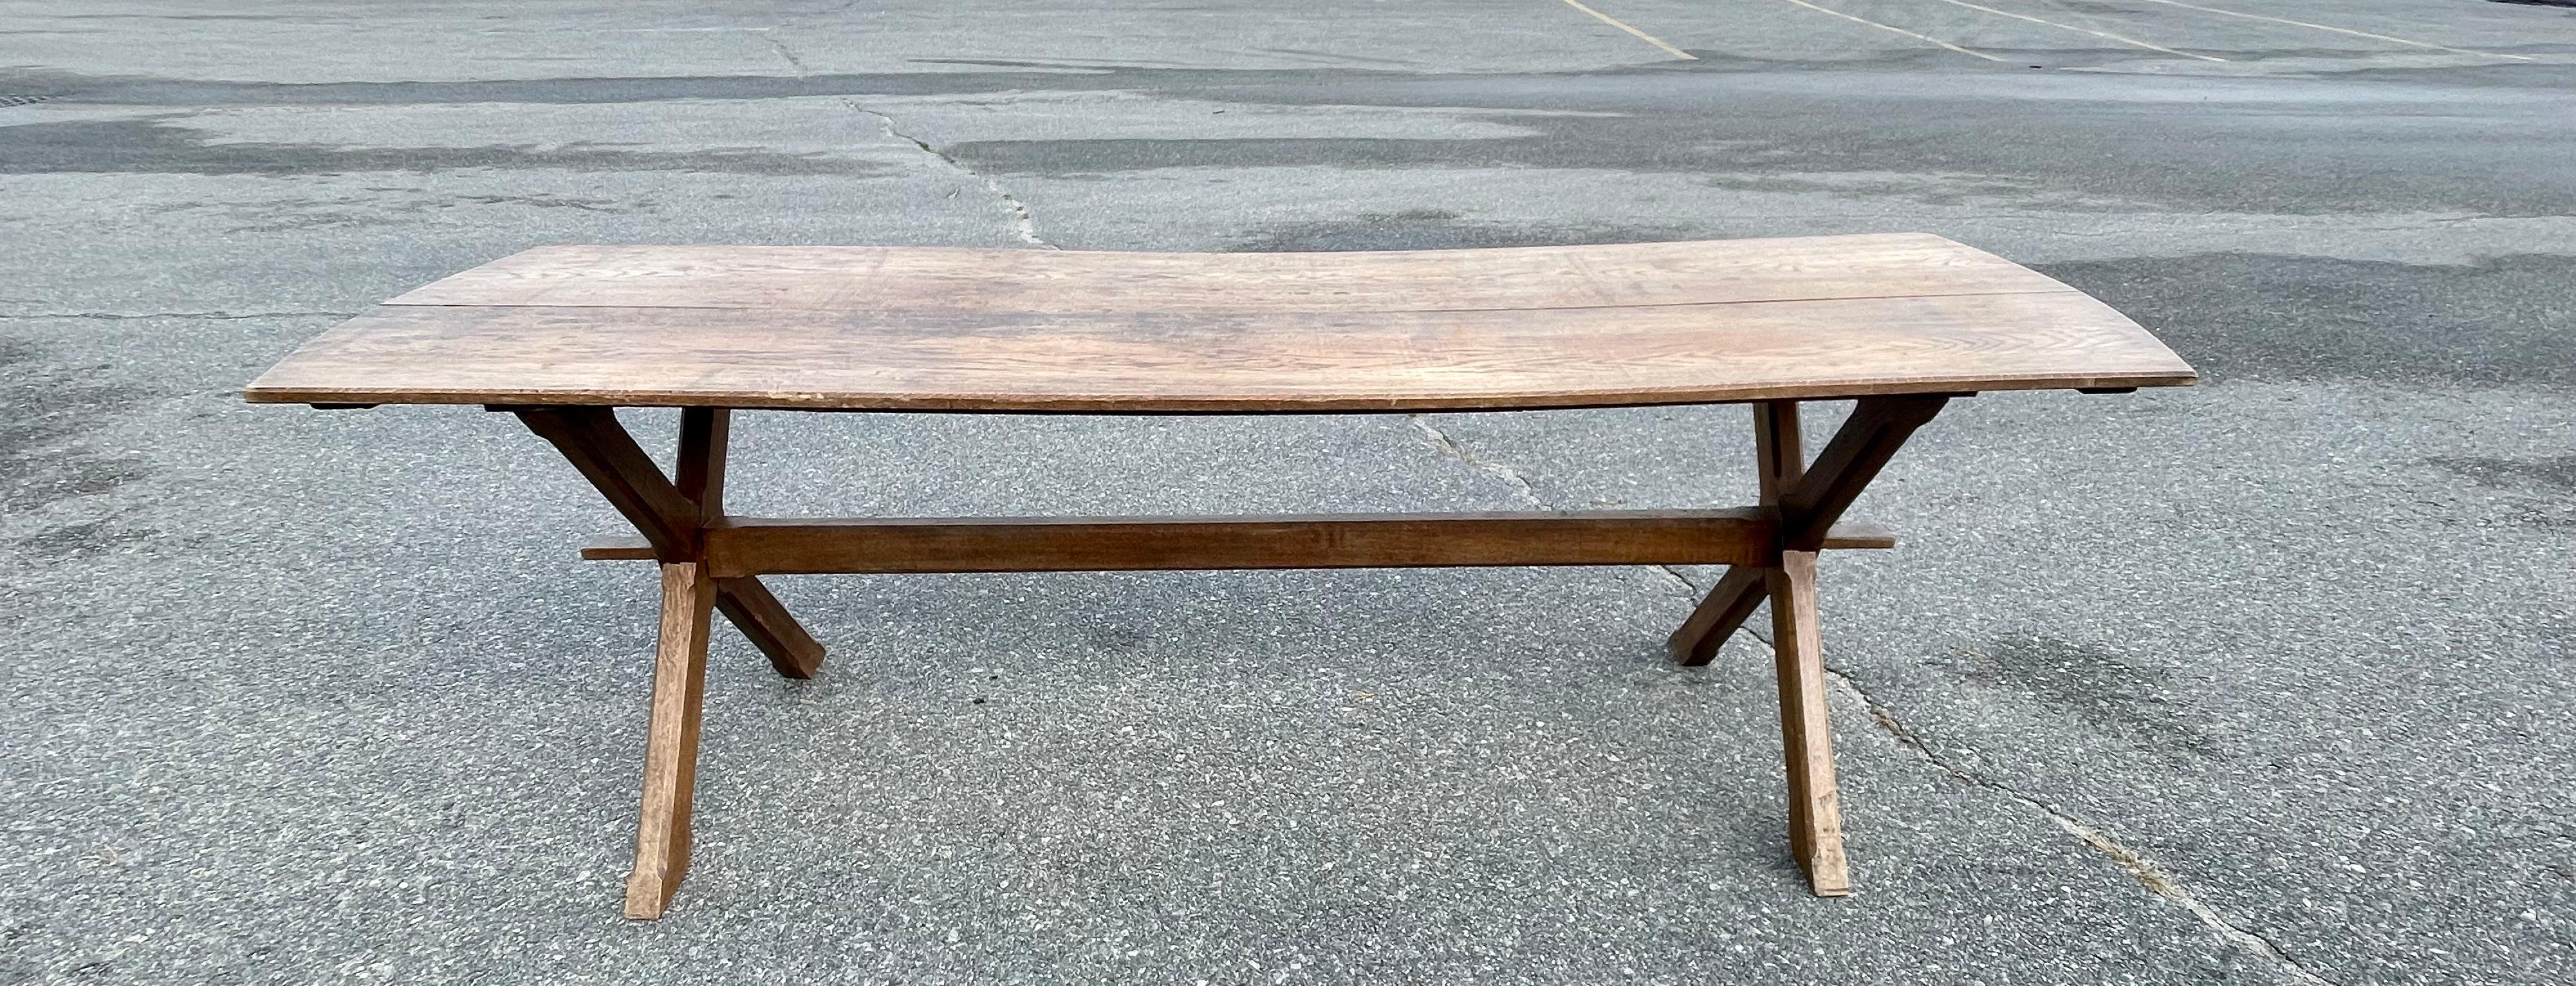 Oak Trestle Table  In Good Condition For Sale In Nantucket, MA